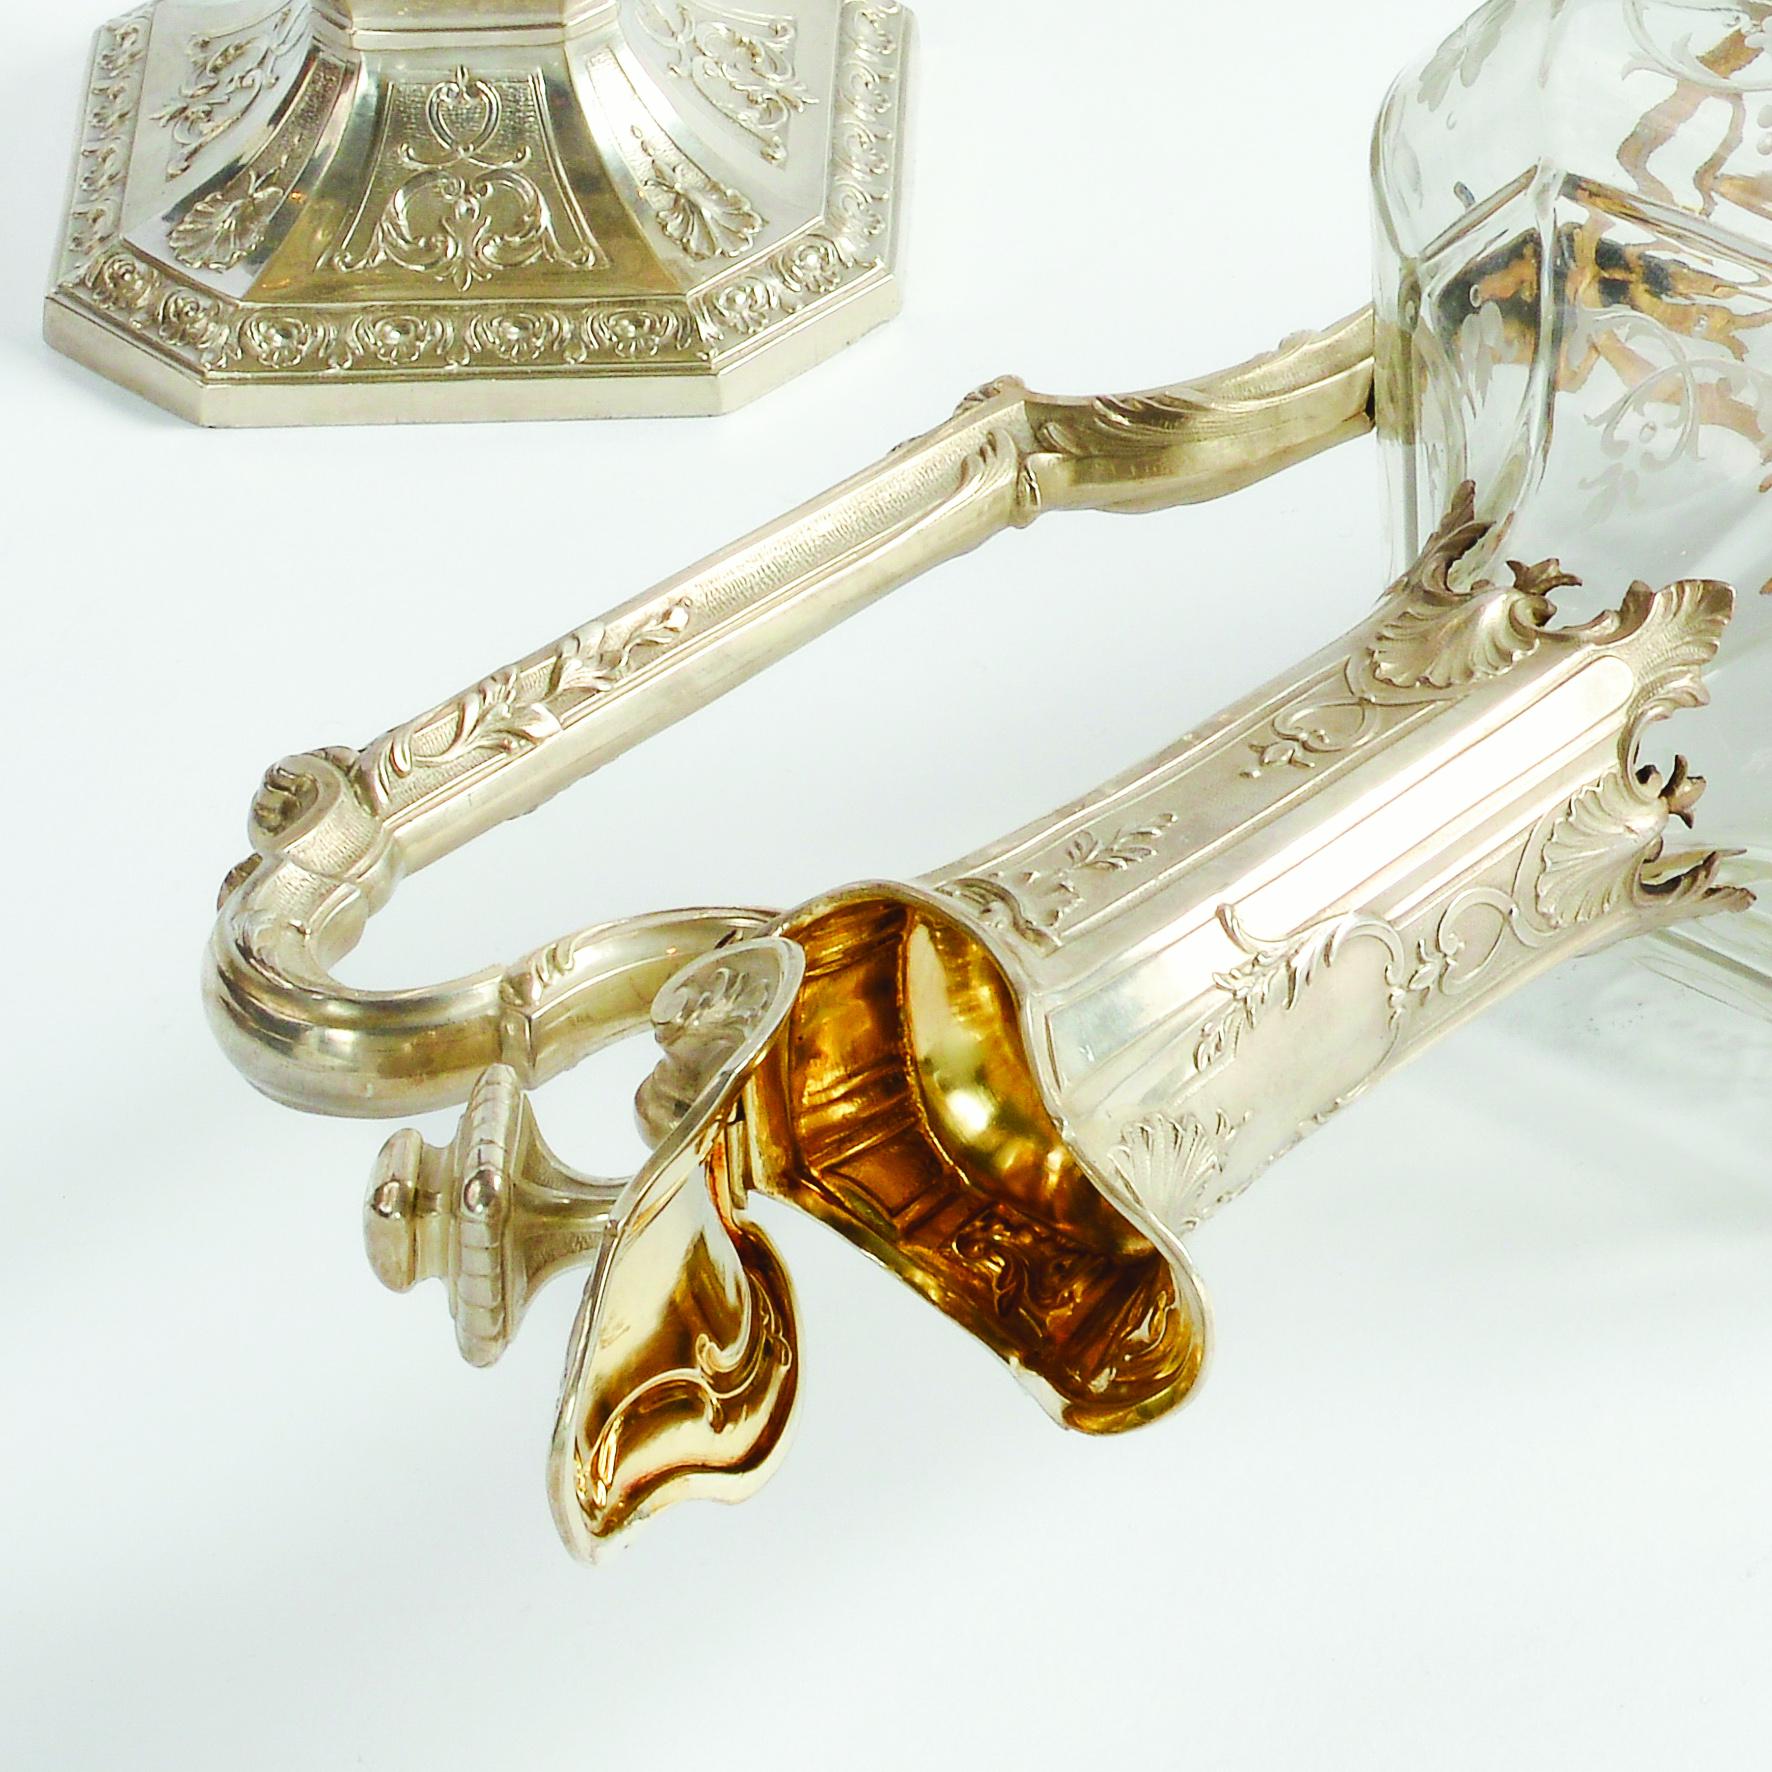 Rare Crystal Square Shape Delicate Pair Silver Ewers Mounted by Boivin C.1900  For Sale 2